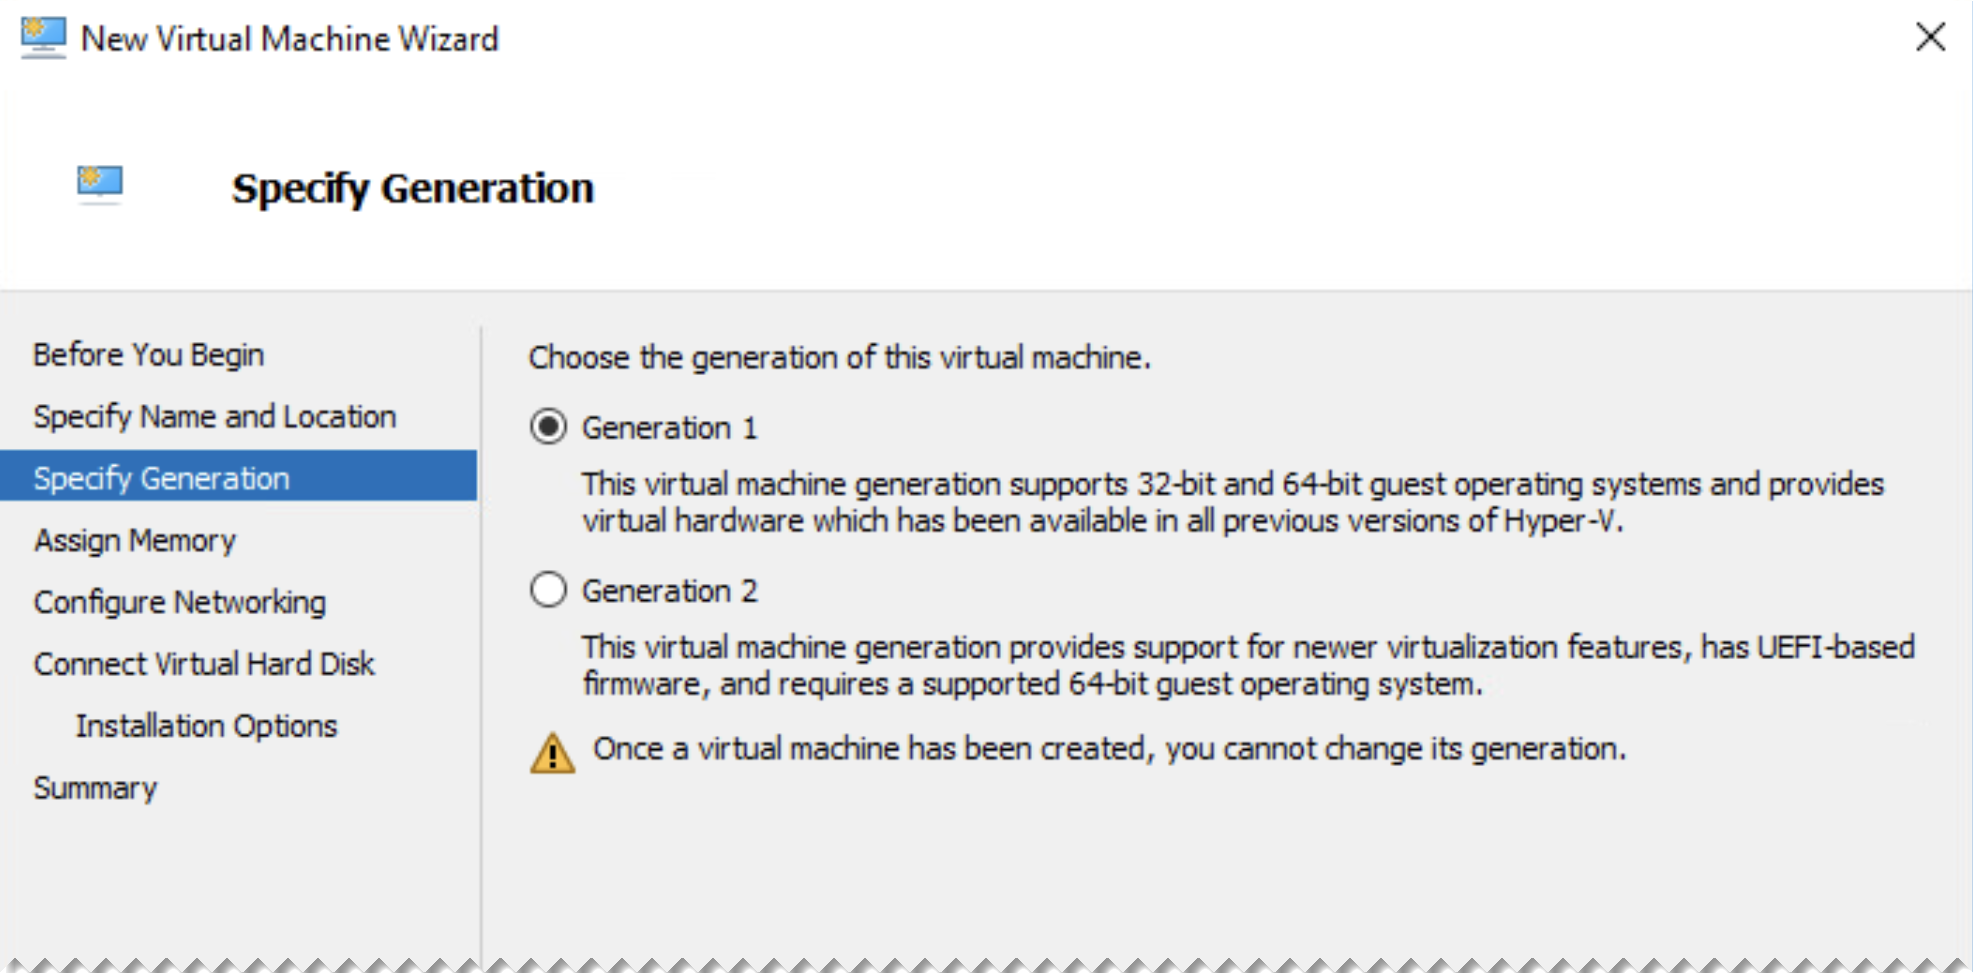 Specify Generation page.